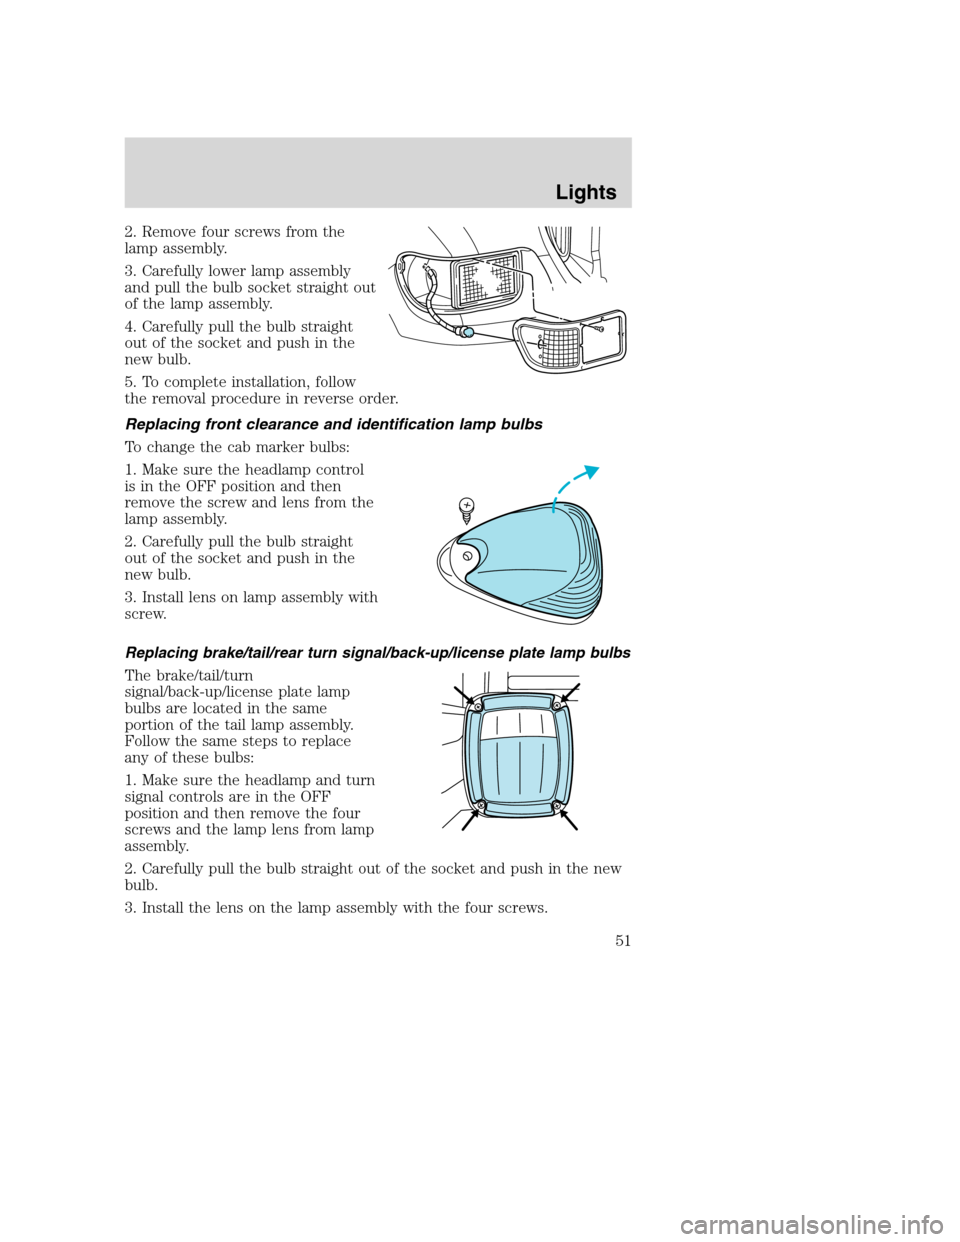 FORD F750 2005 11.G Owners Manual 2. Remove four screws from the
lamp assembly.
3. Carefully lower lamp assembly
and pull the bulb socket straight out
of the lamp assembly.
4. Carefully pull the bulb straight
out of the socket and pus